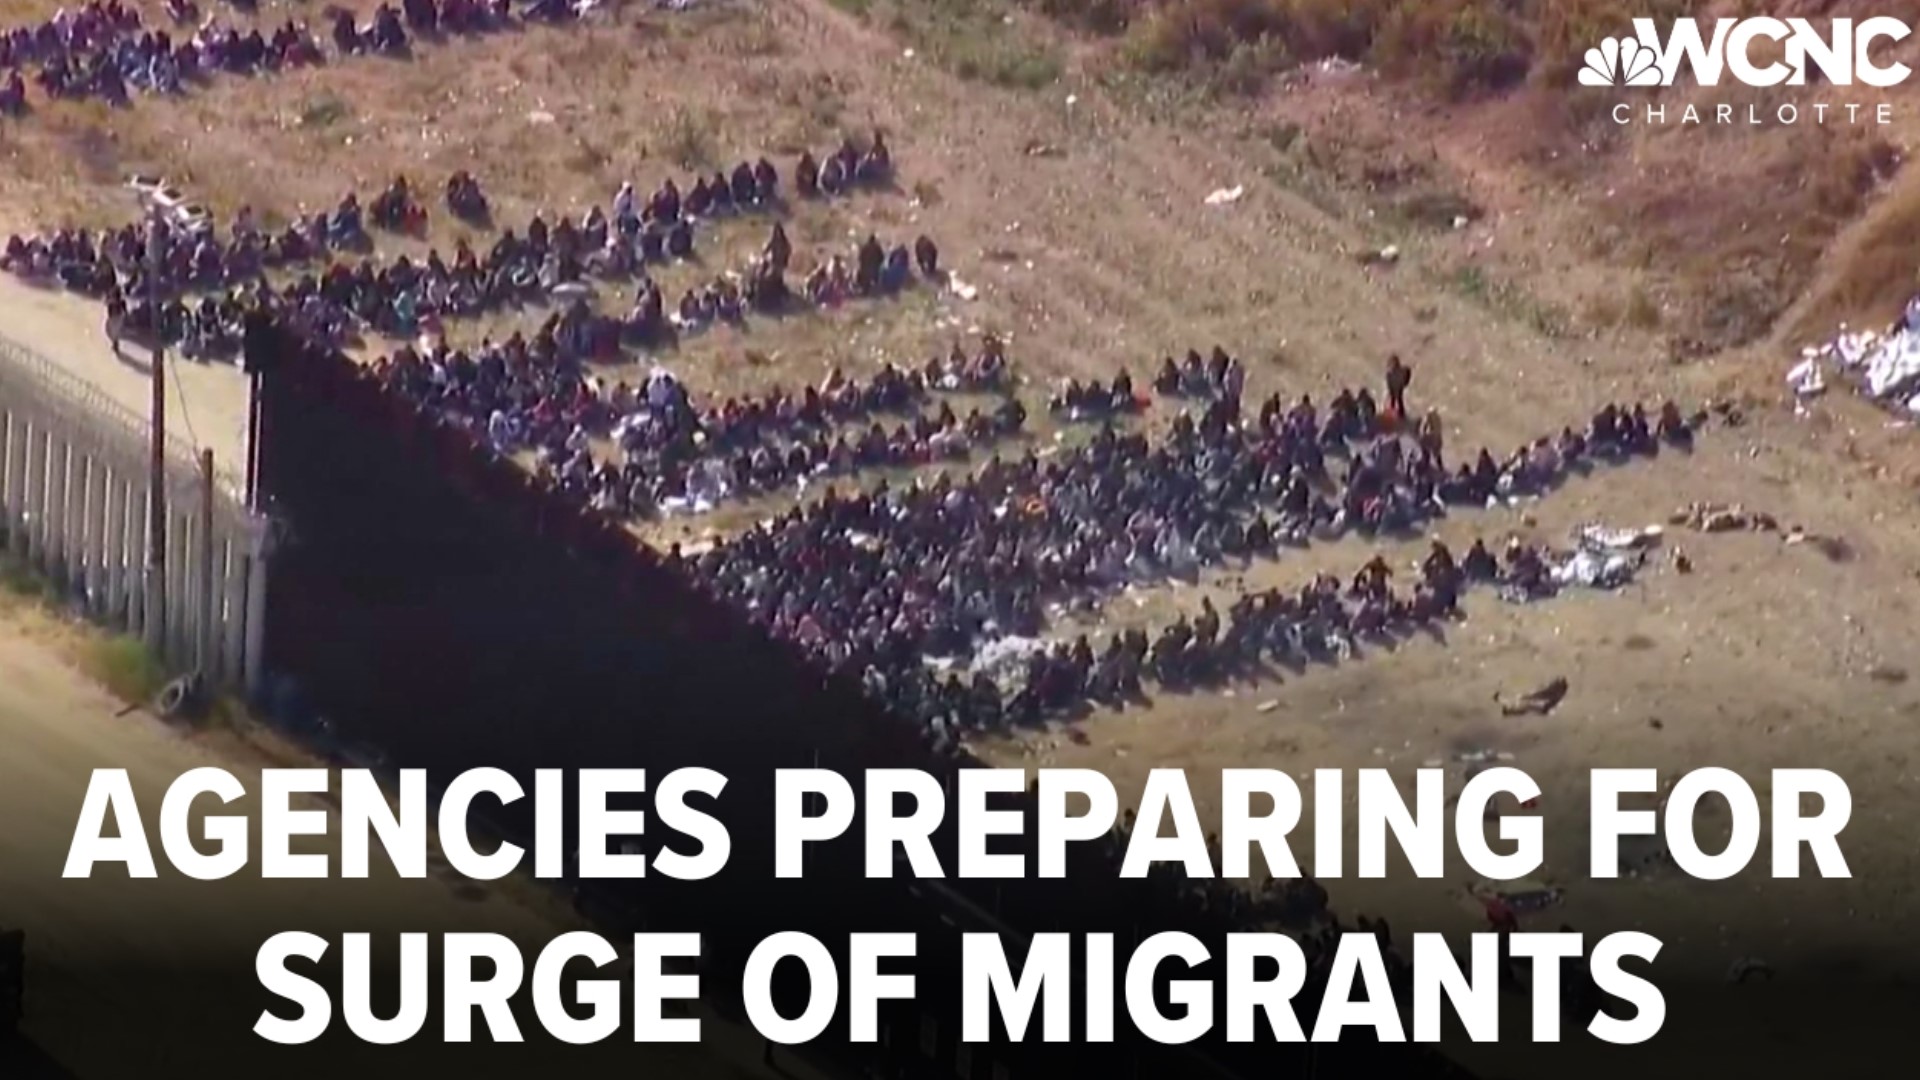 U.S. officials are expecting a surge of migrants across the southern border.